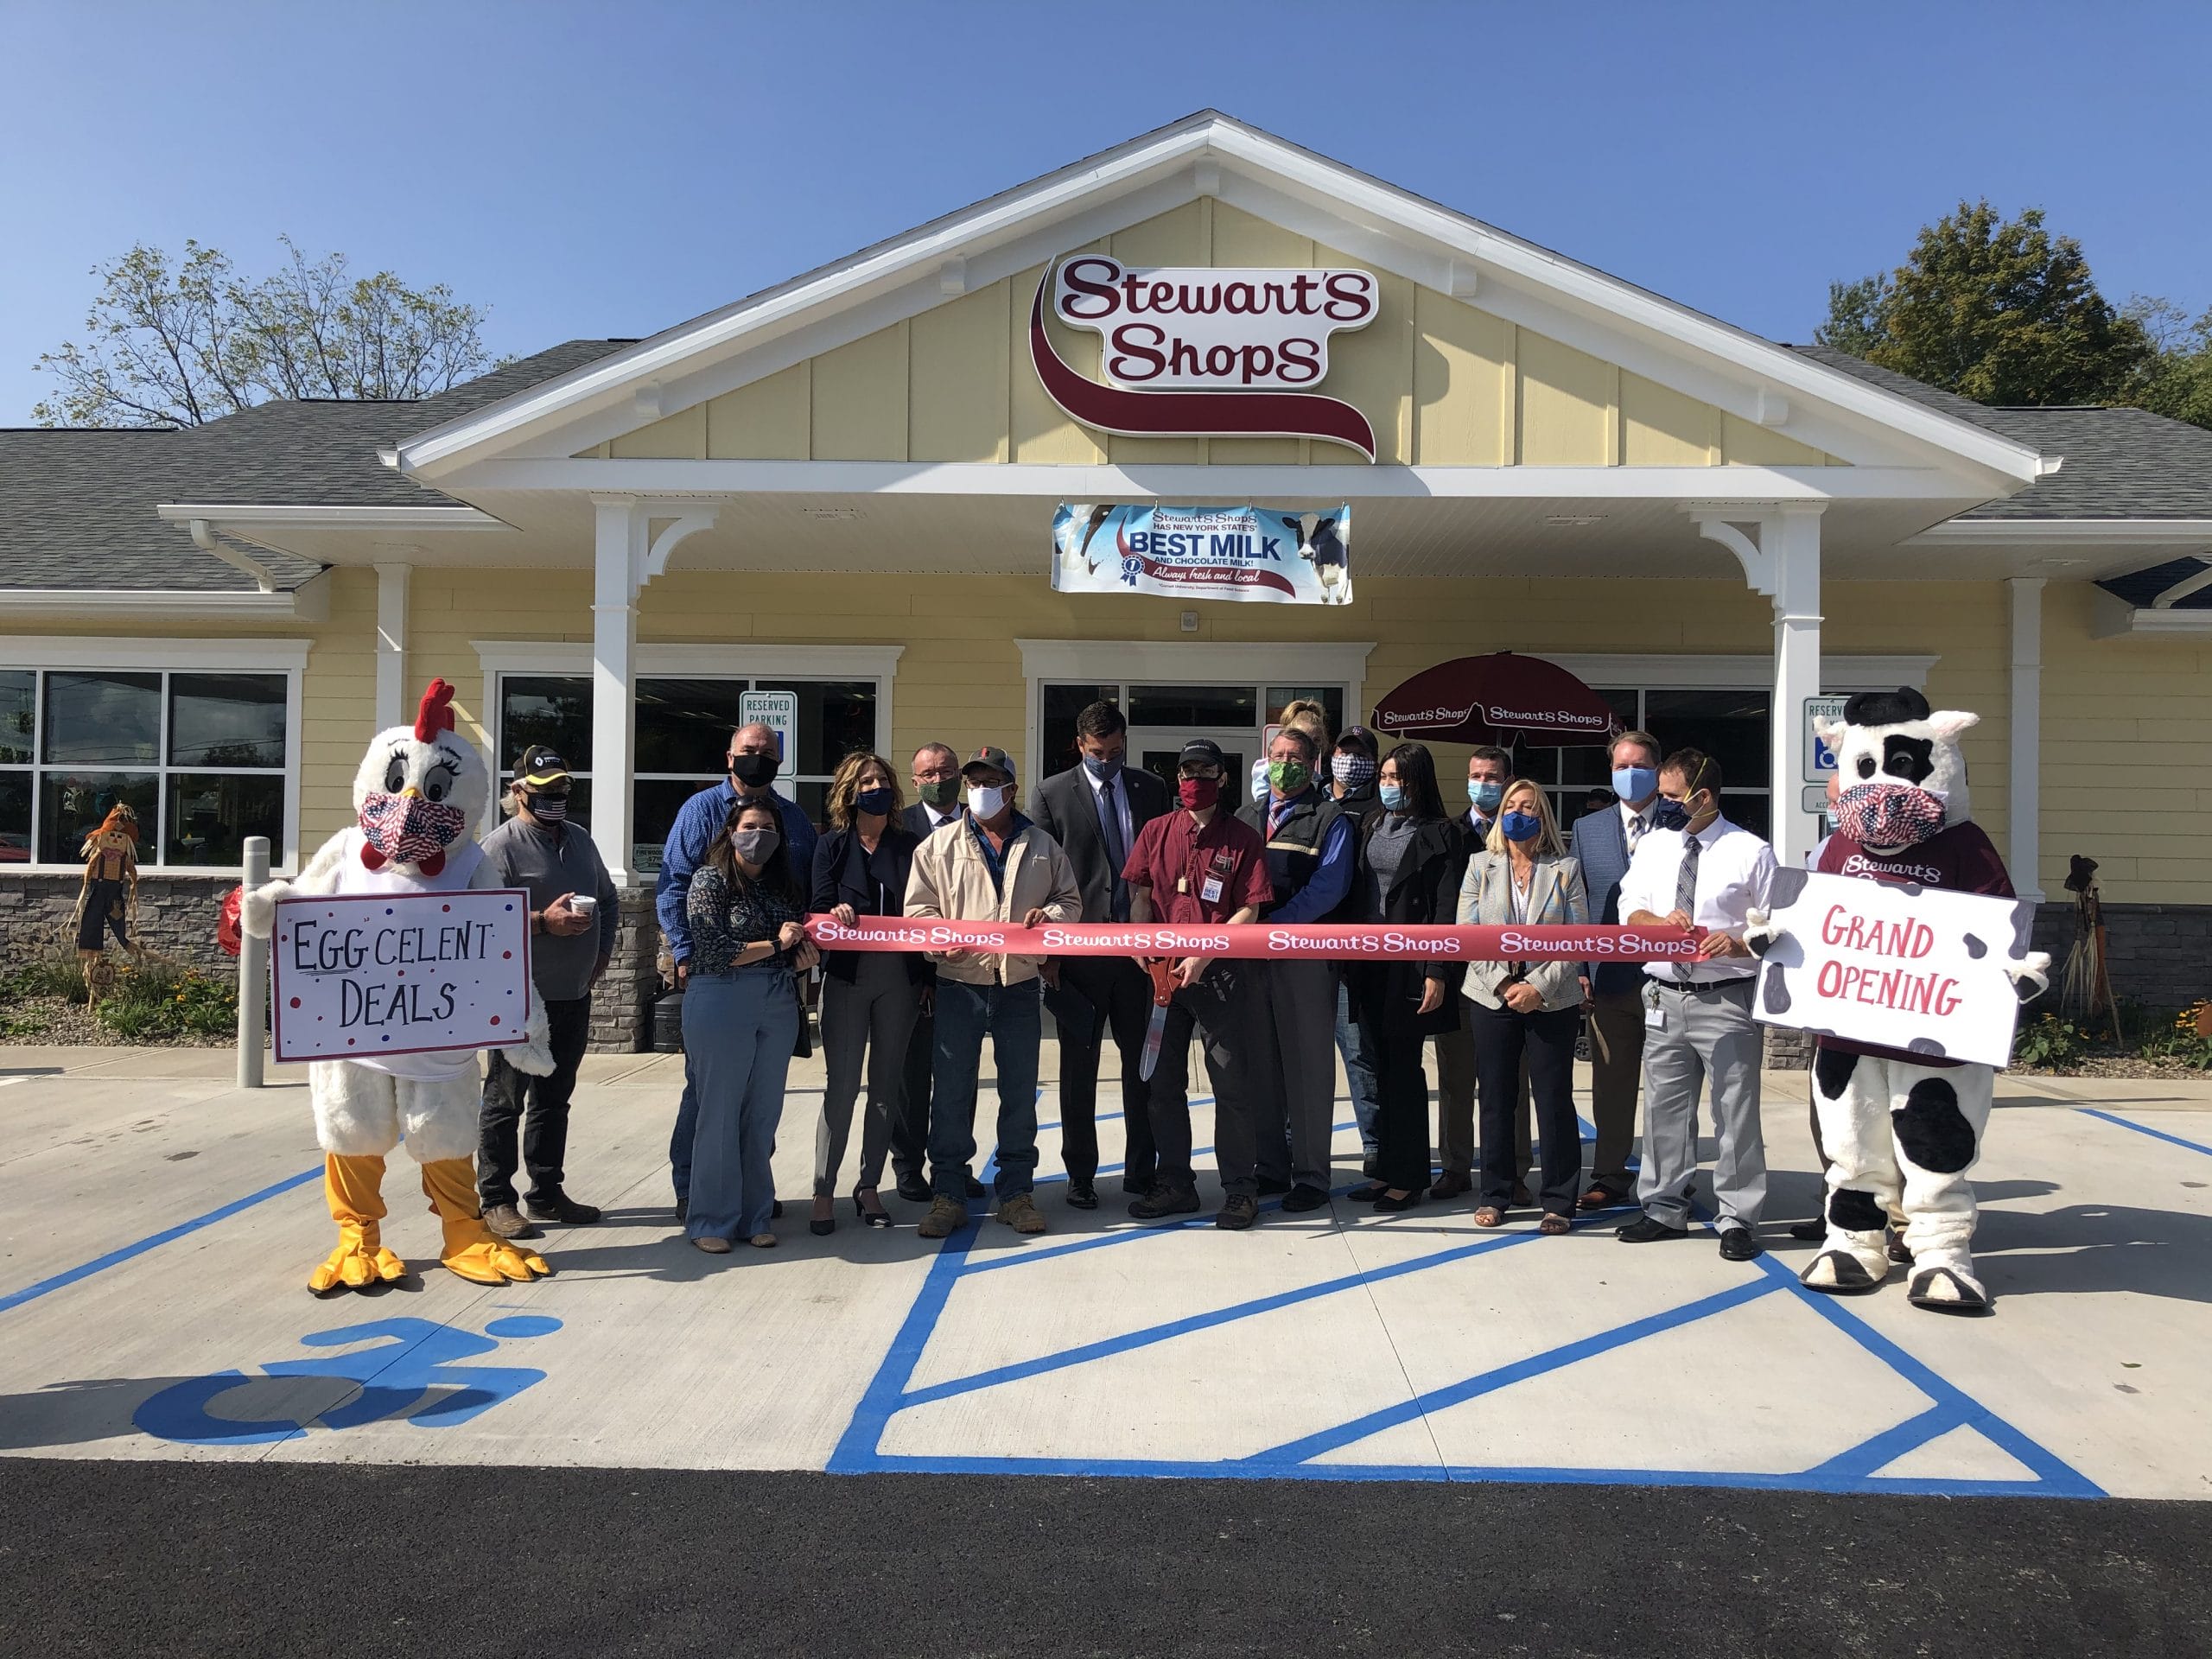 Ribbon cutting at the Shop. Eggcelent deals and grand opening written on signs.